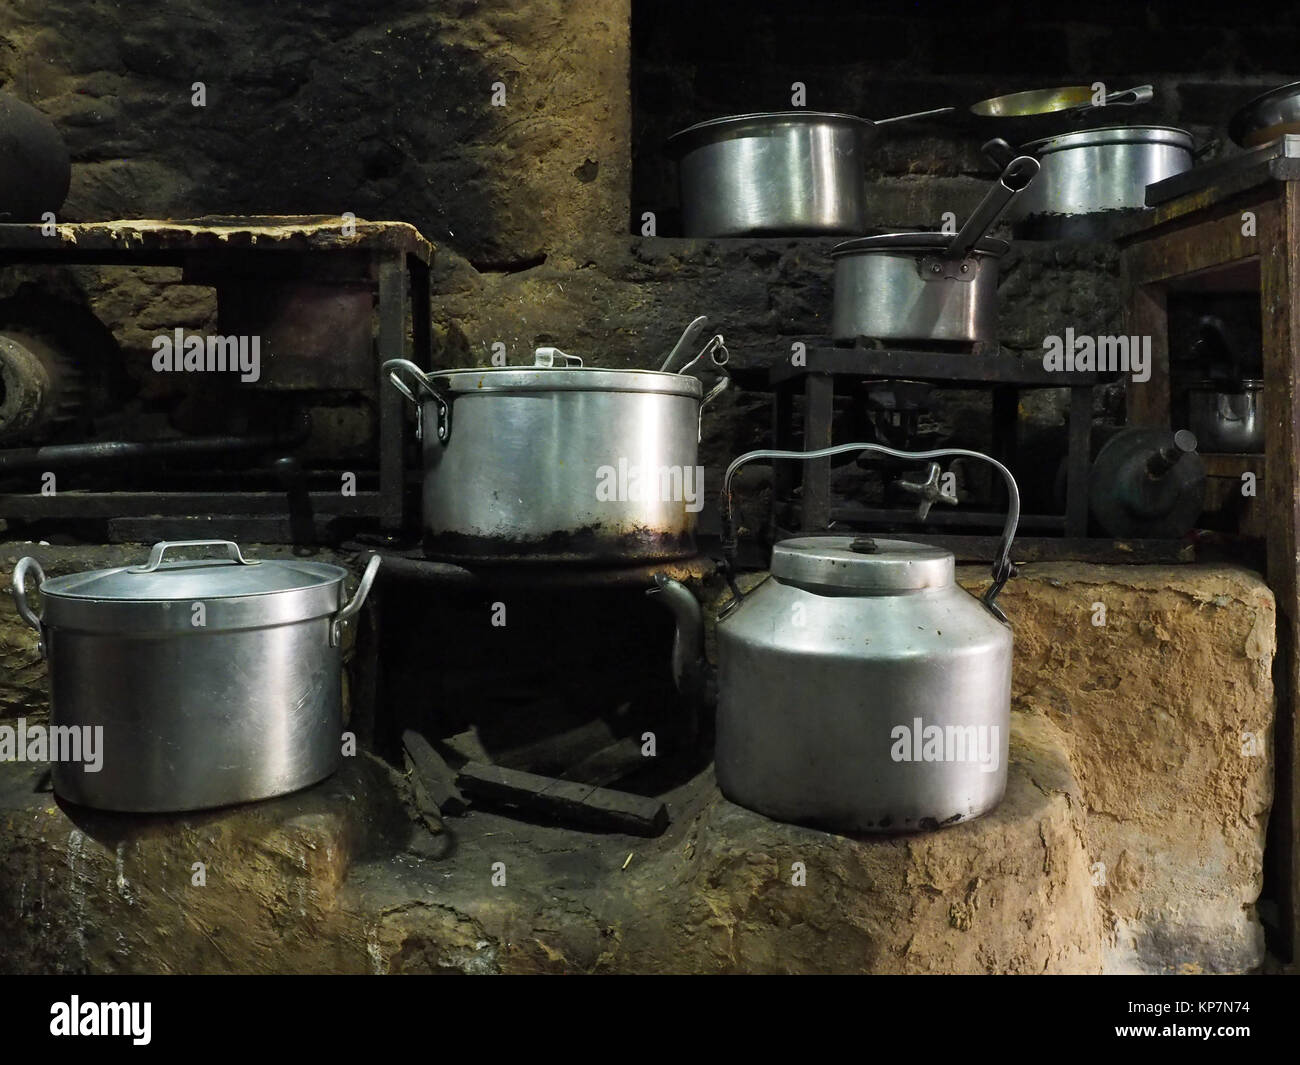 https://c8.alamy.com/comp/KP7N74/metal-dishes-huge-aluminum-pots-and-chalices-stand-in-disorder-on-KP7N74.jpg